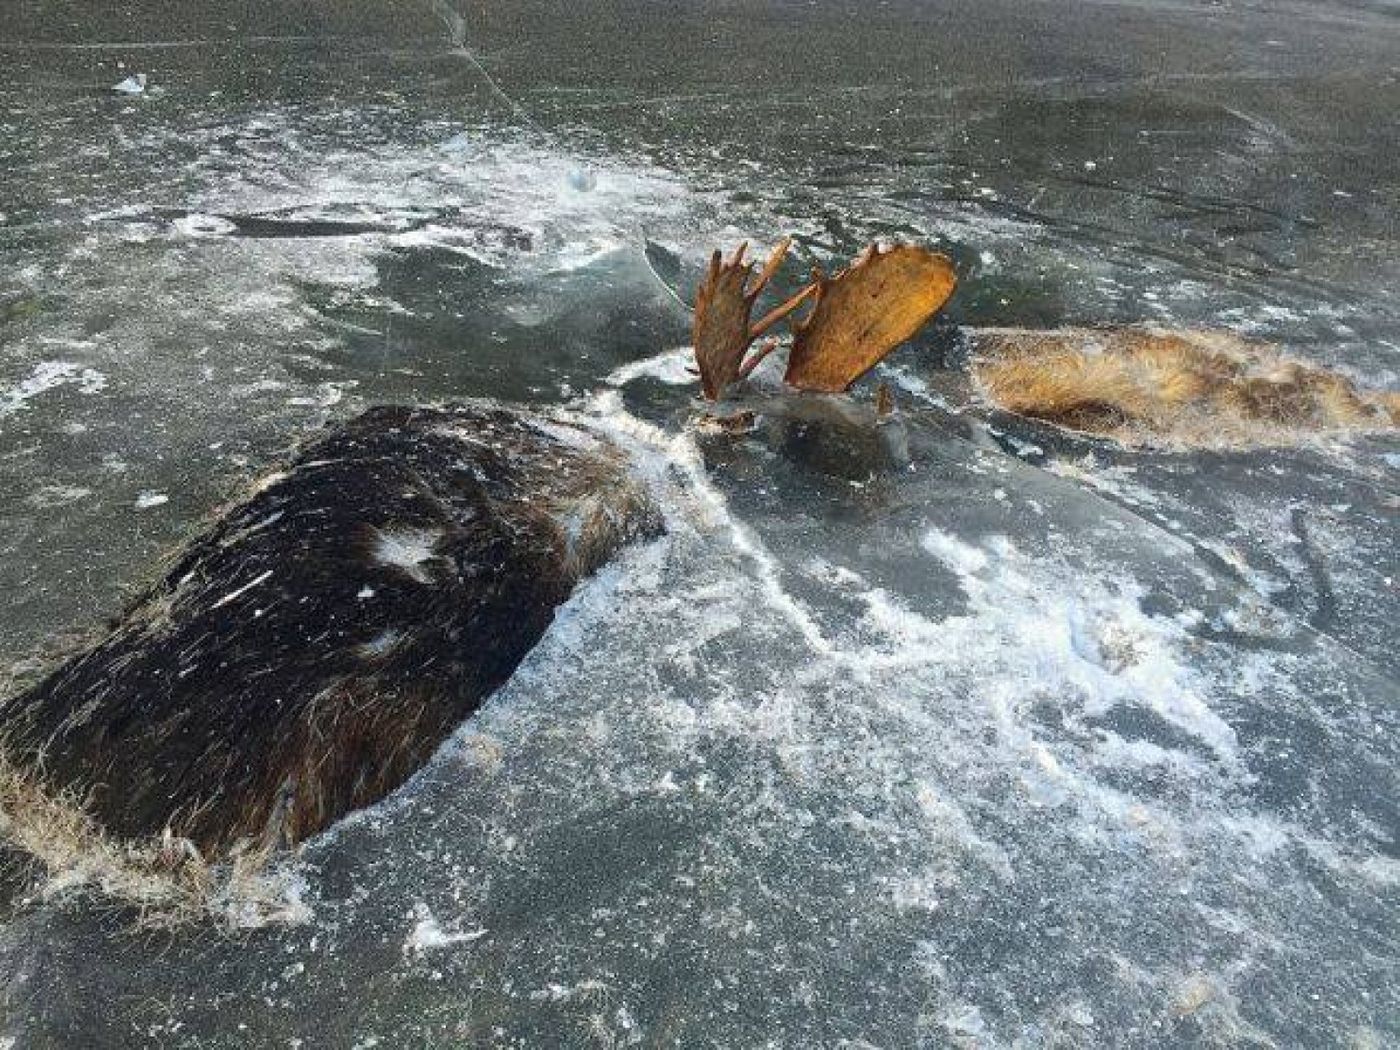 Two moose were photographed frozen in ice during what was presumeably a battle over a cow.